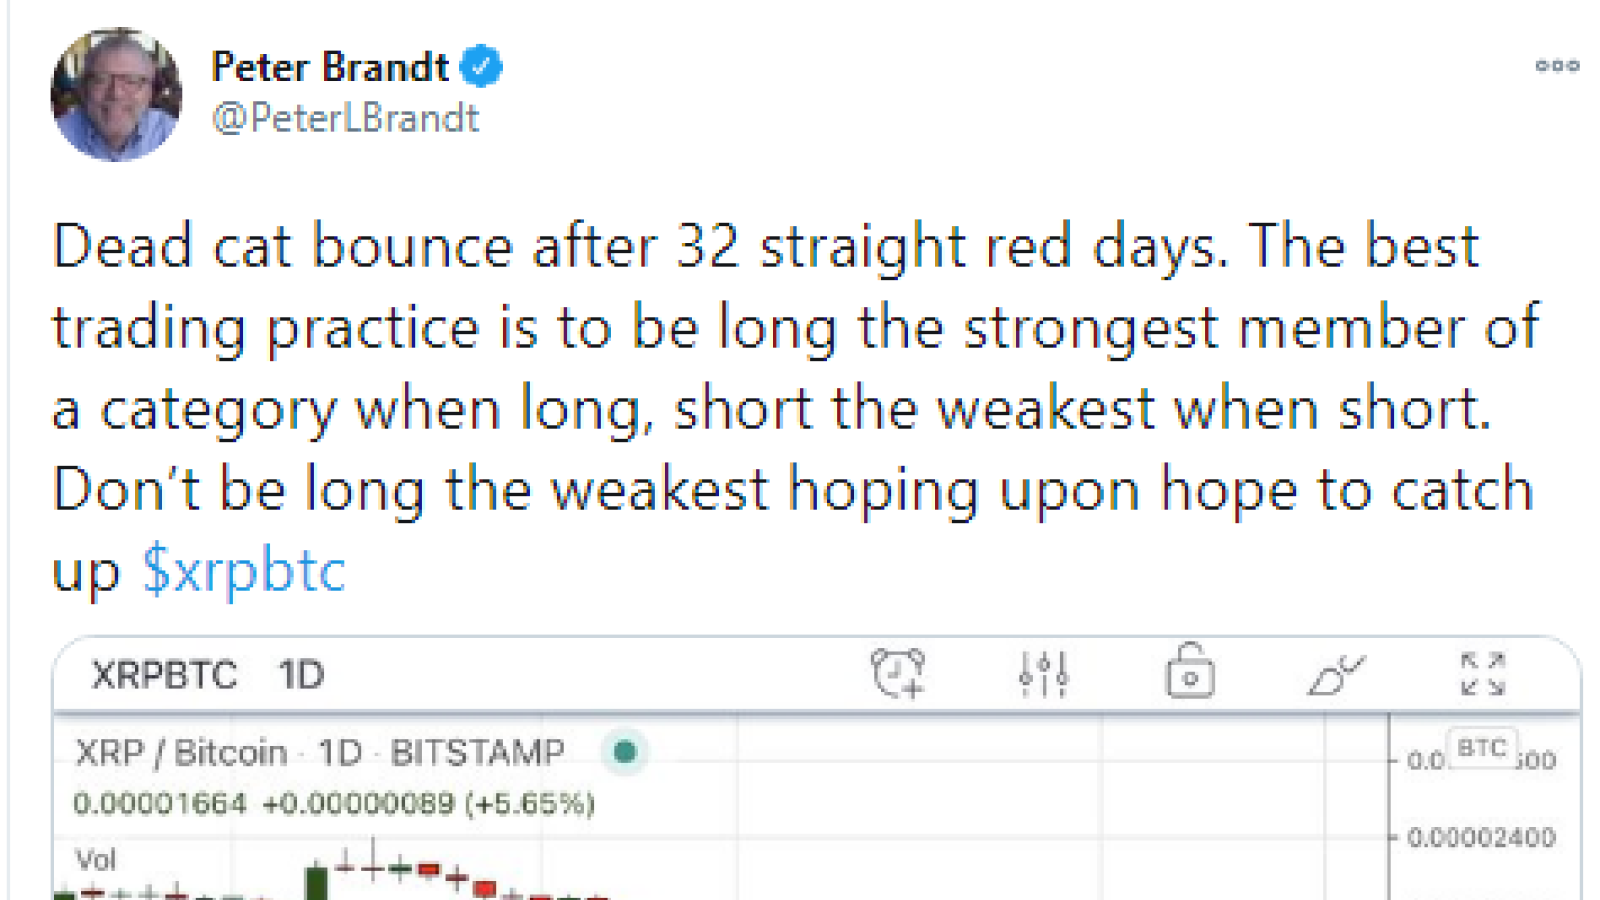 Peter Brandt isn't enthusiastic about XRP